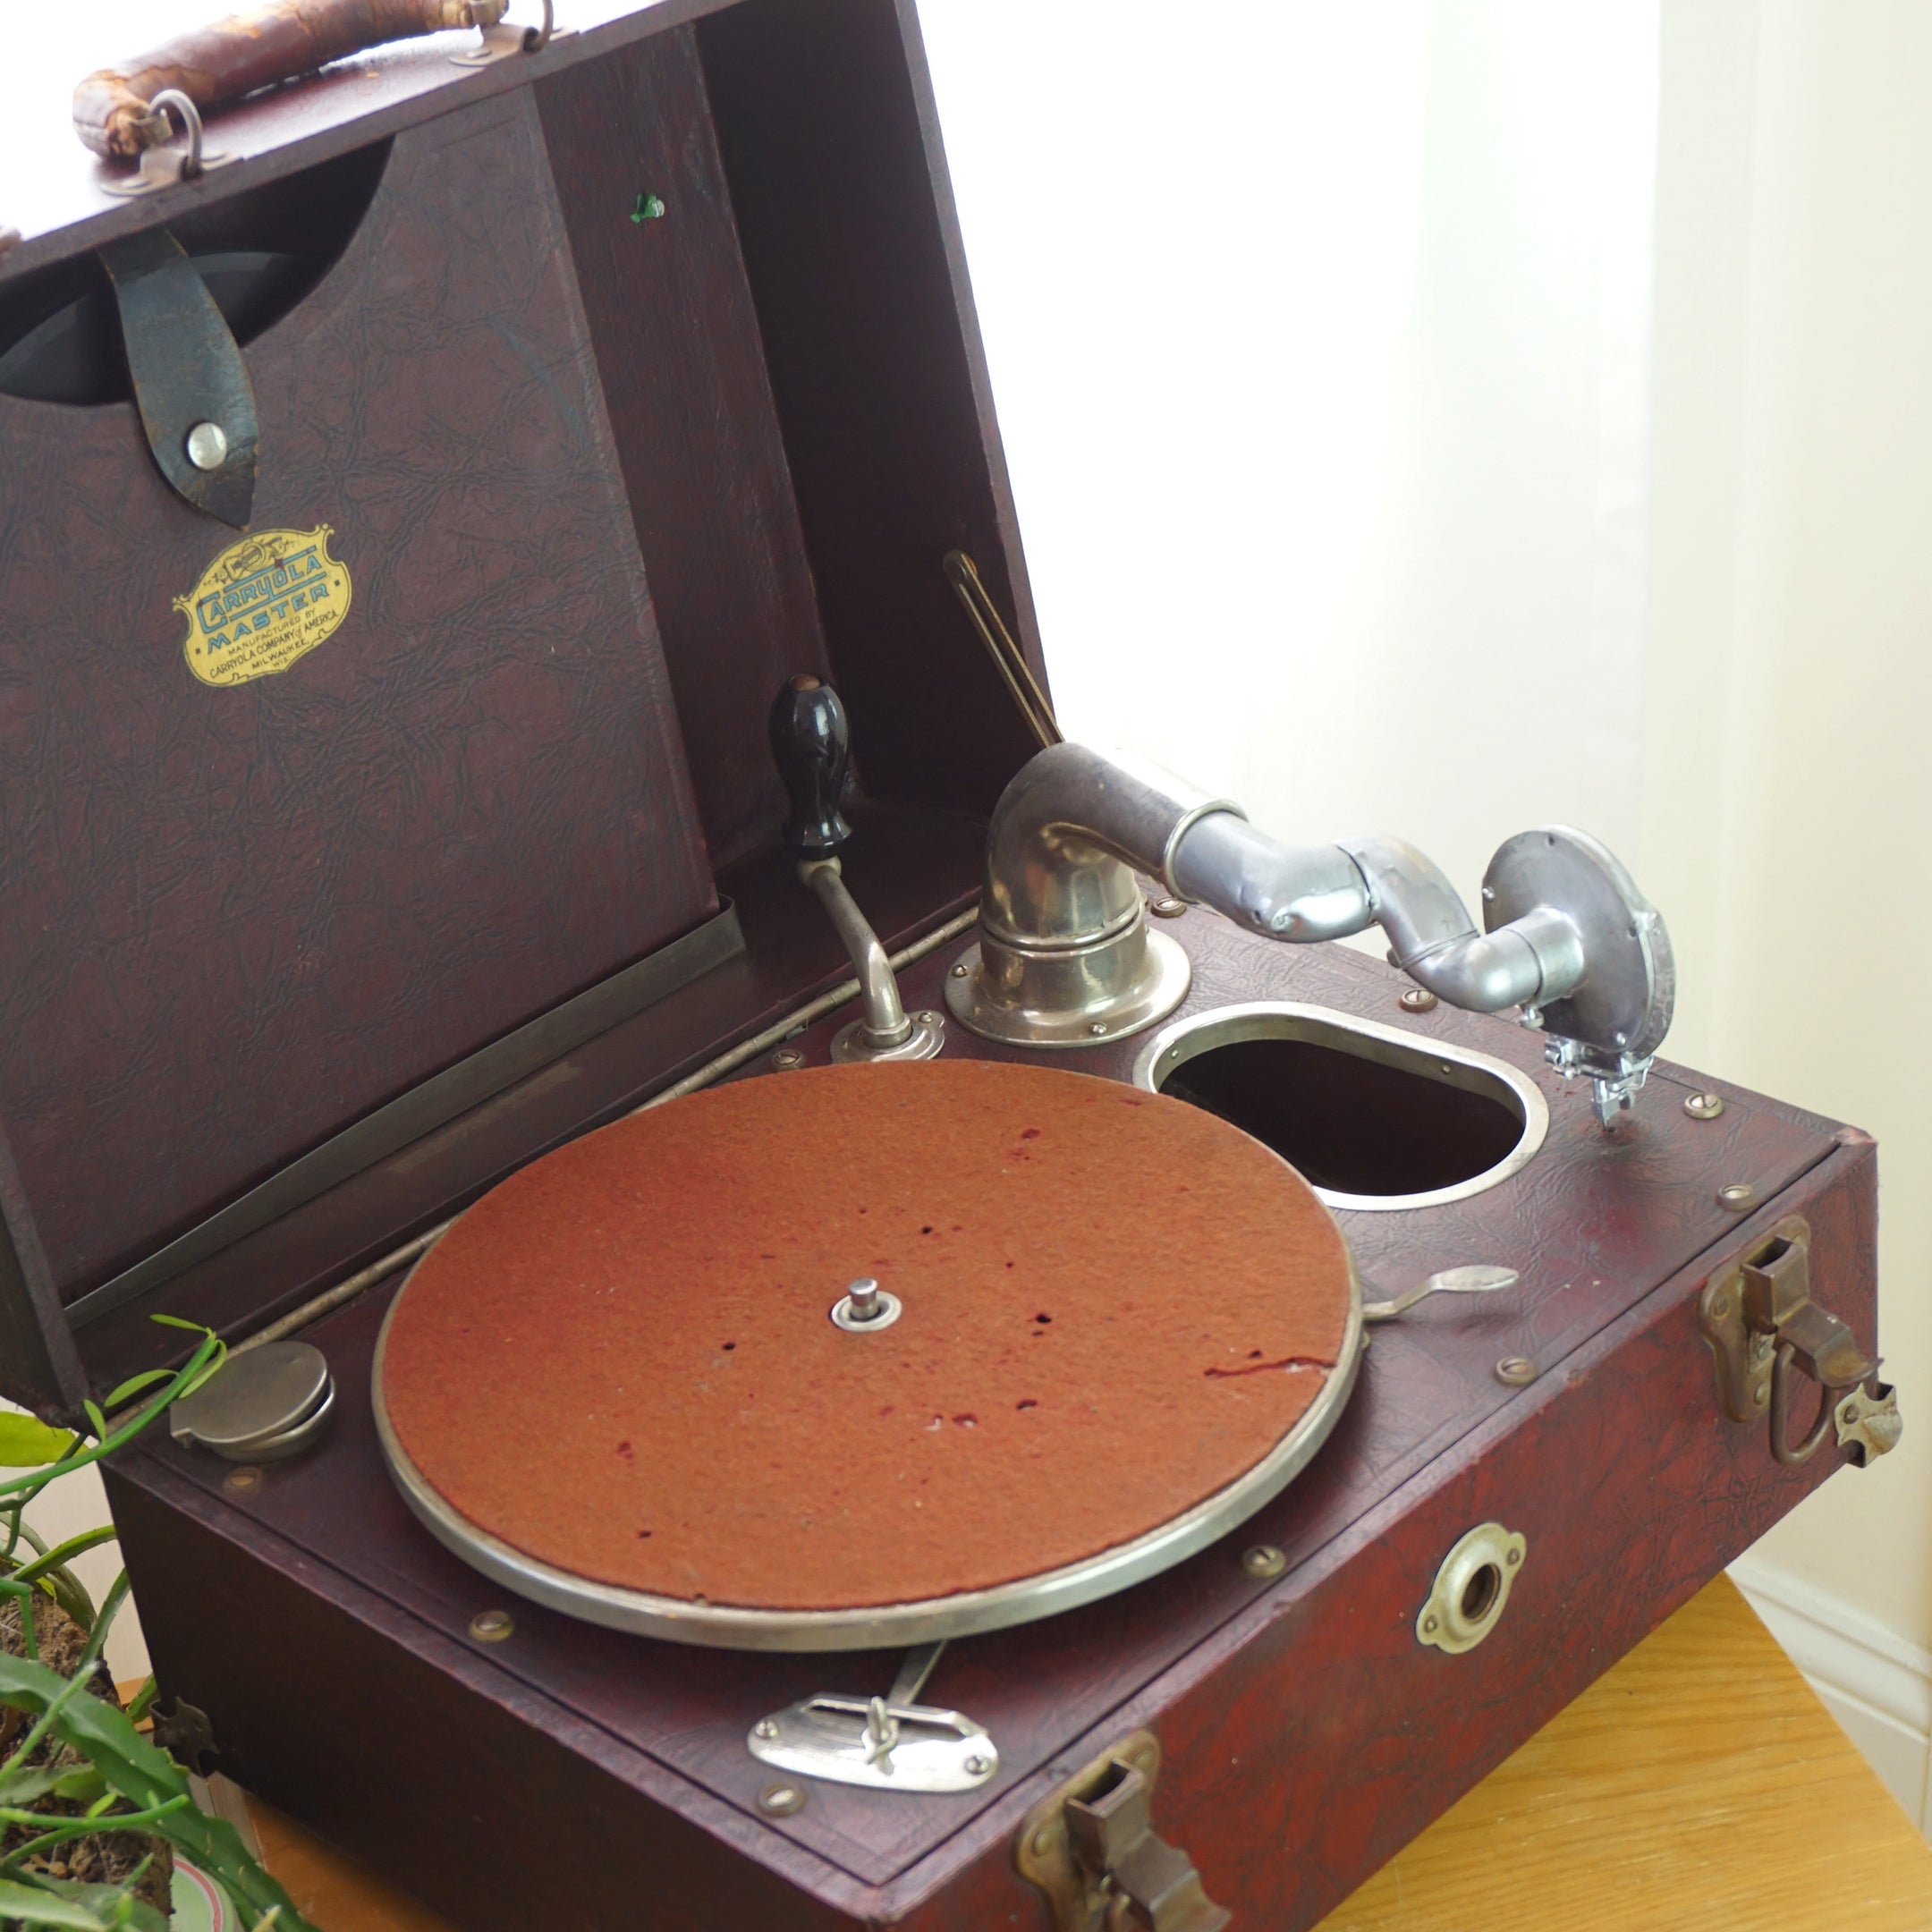 first record player invented